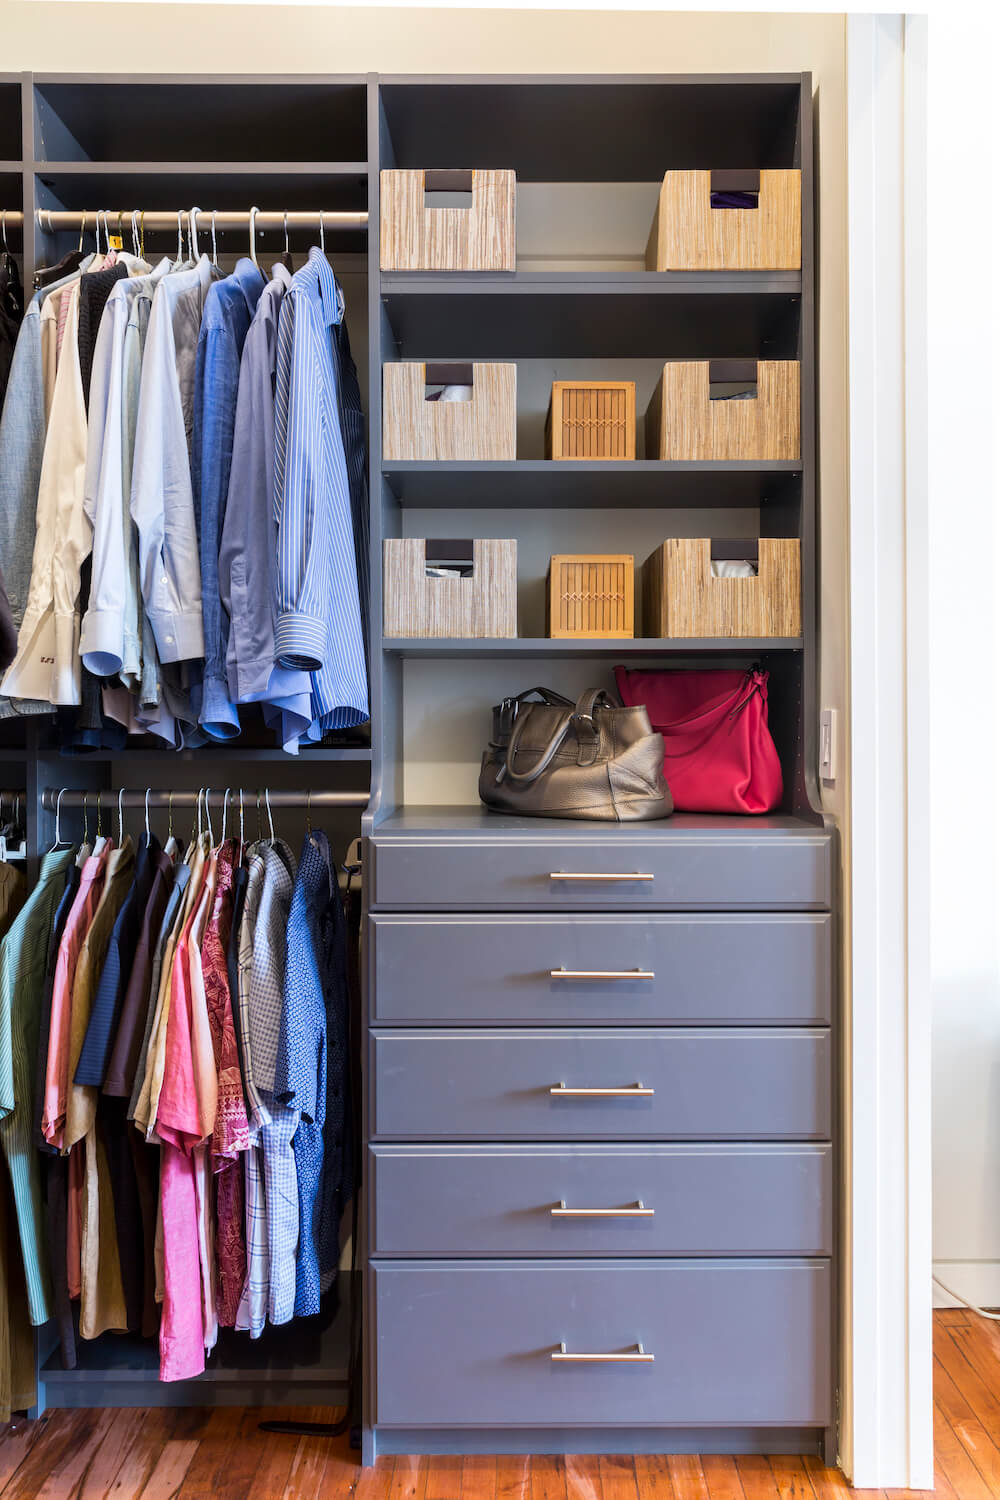 Image of master closet with organization and shelving